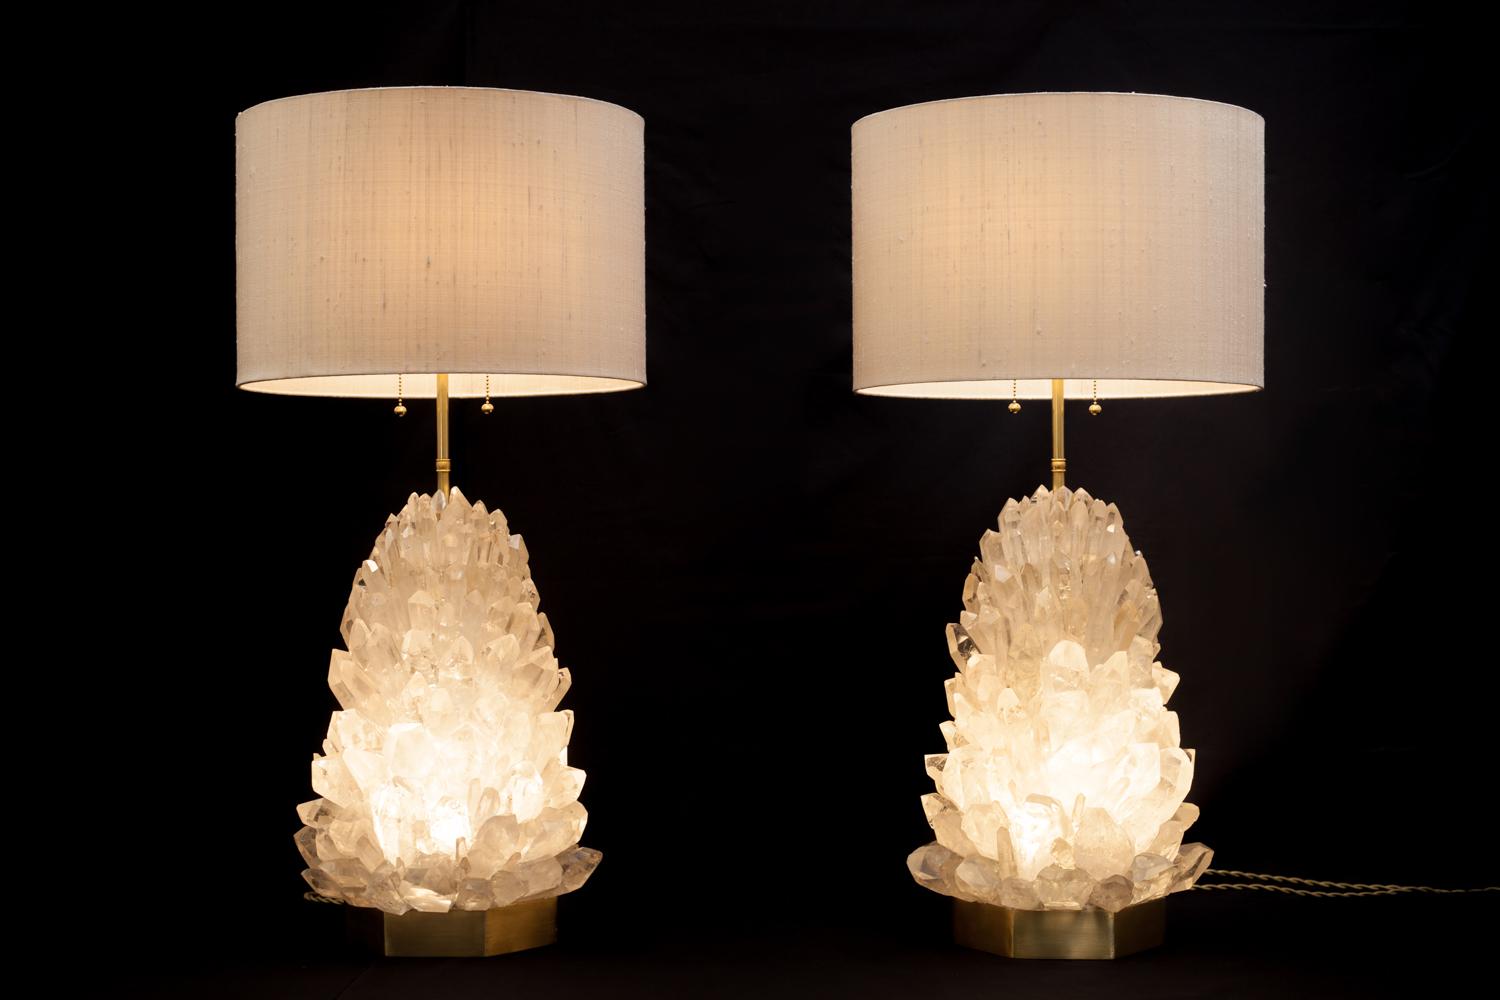 Contemporary Pair of Natural Crystal Table Lamps, Signed by Demian Quincke